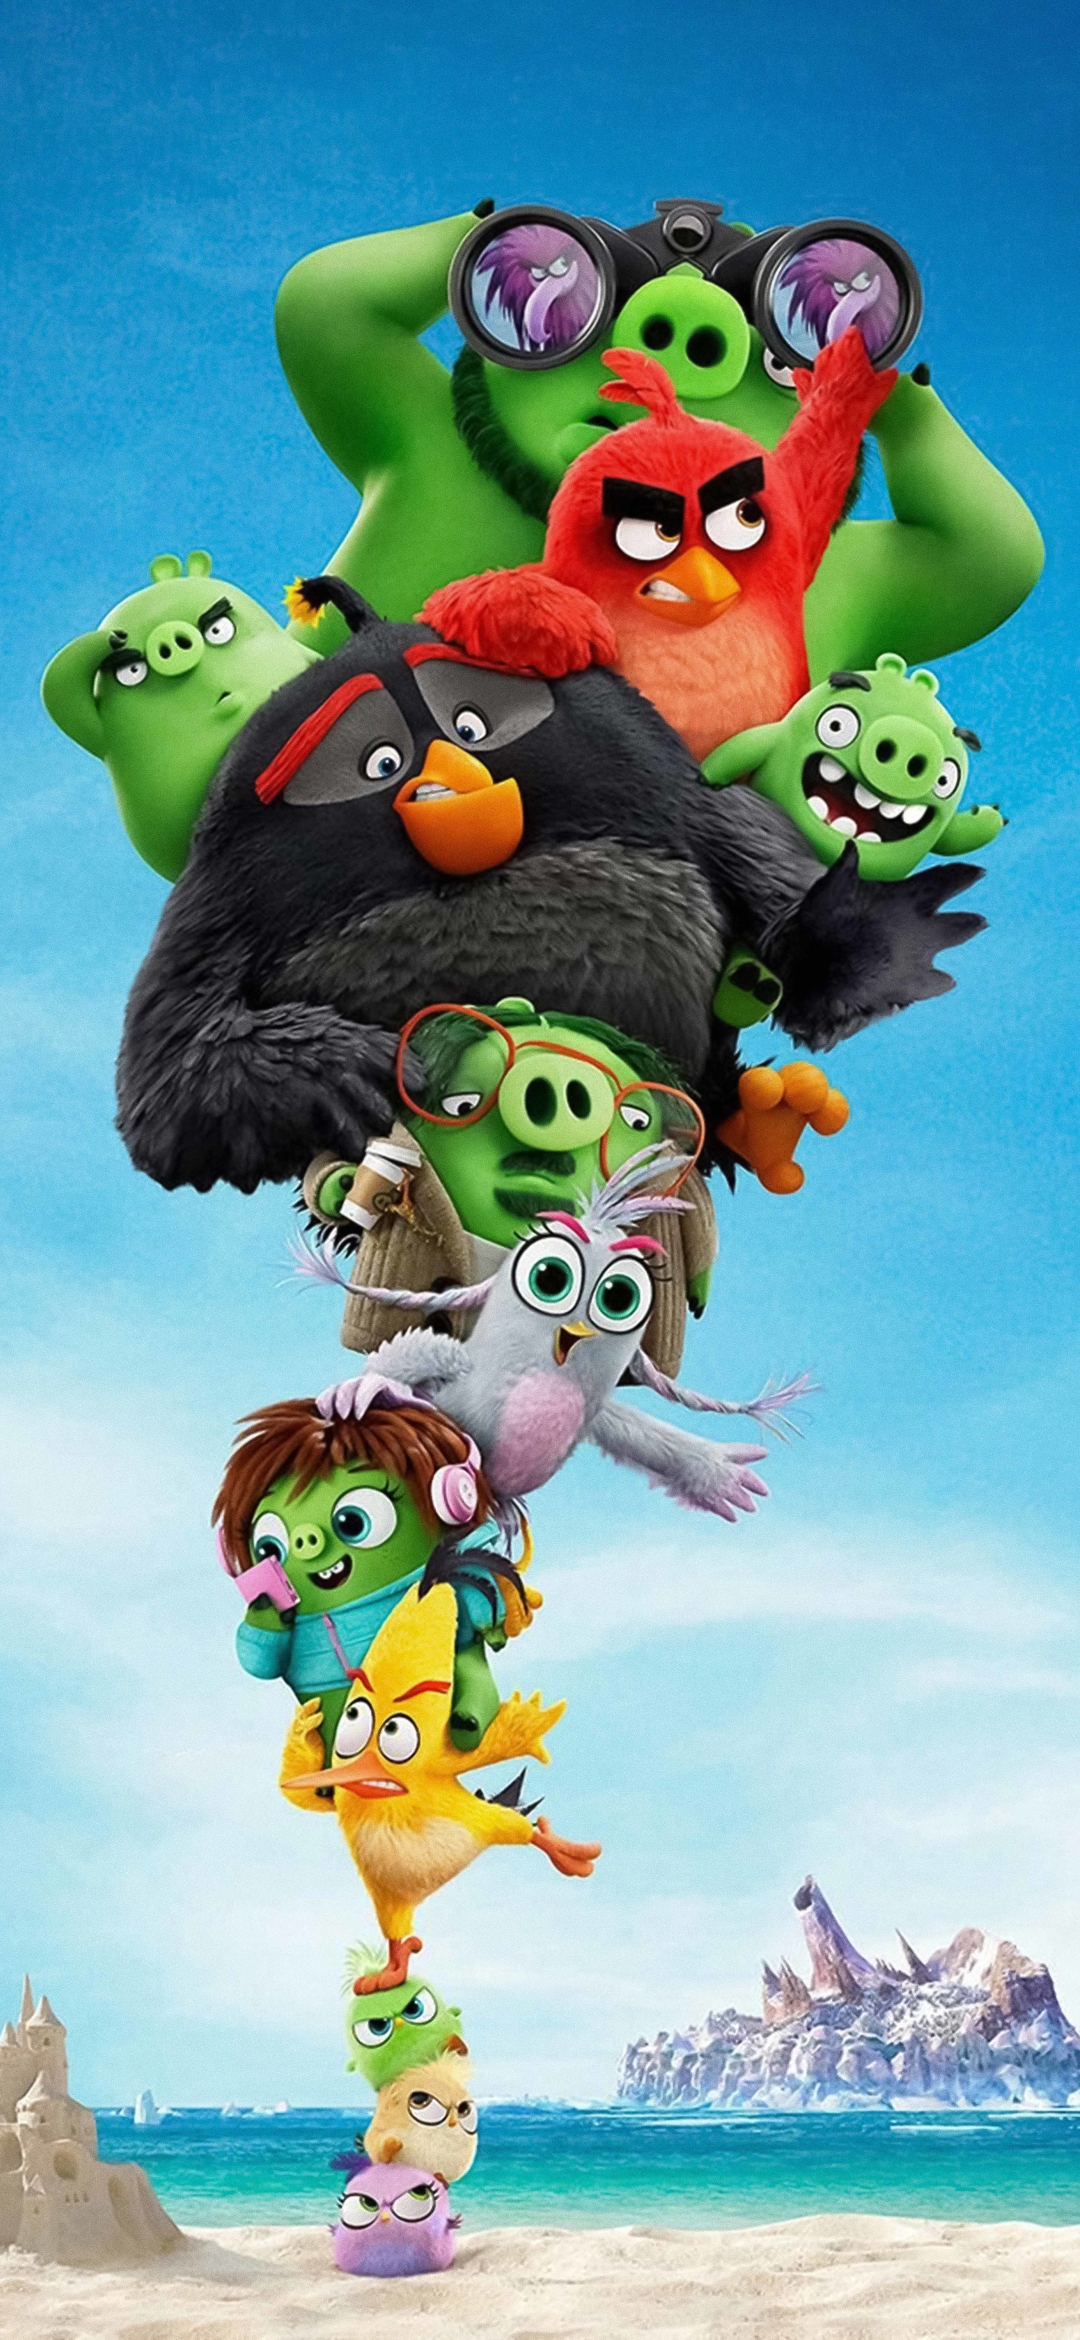 1080x2340 The Angry Birds 2 1080x2340 Resolution Wallpaper Hd